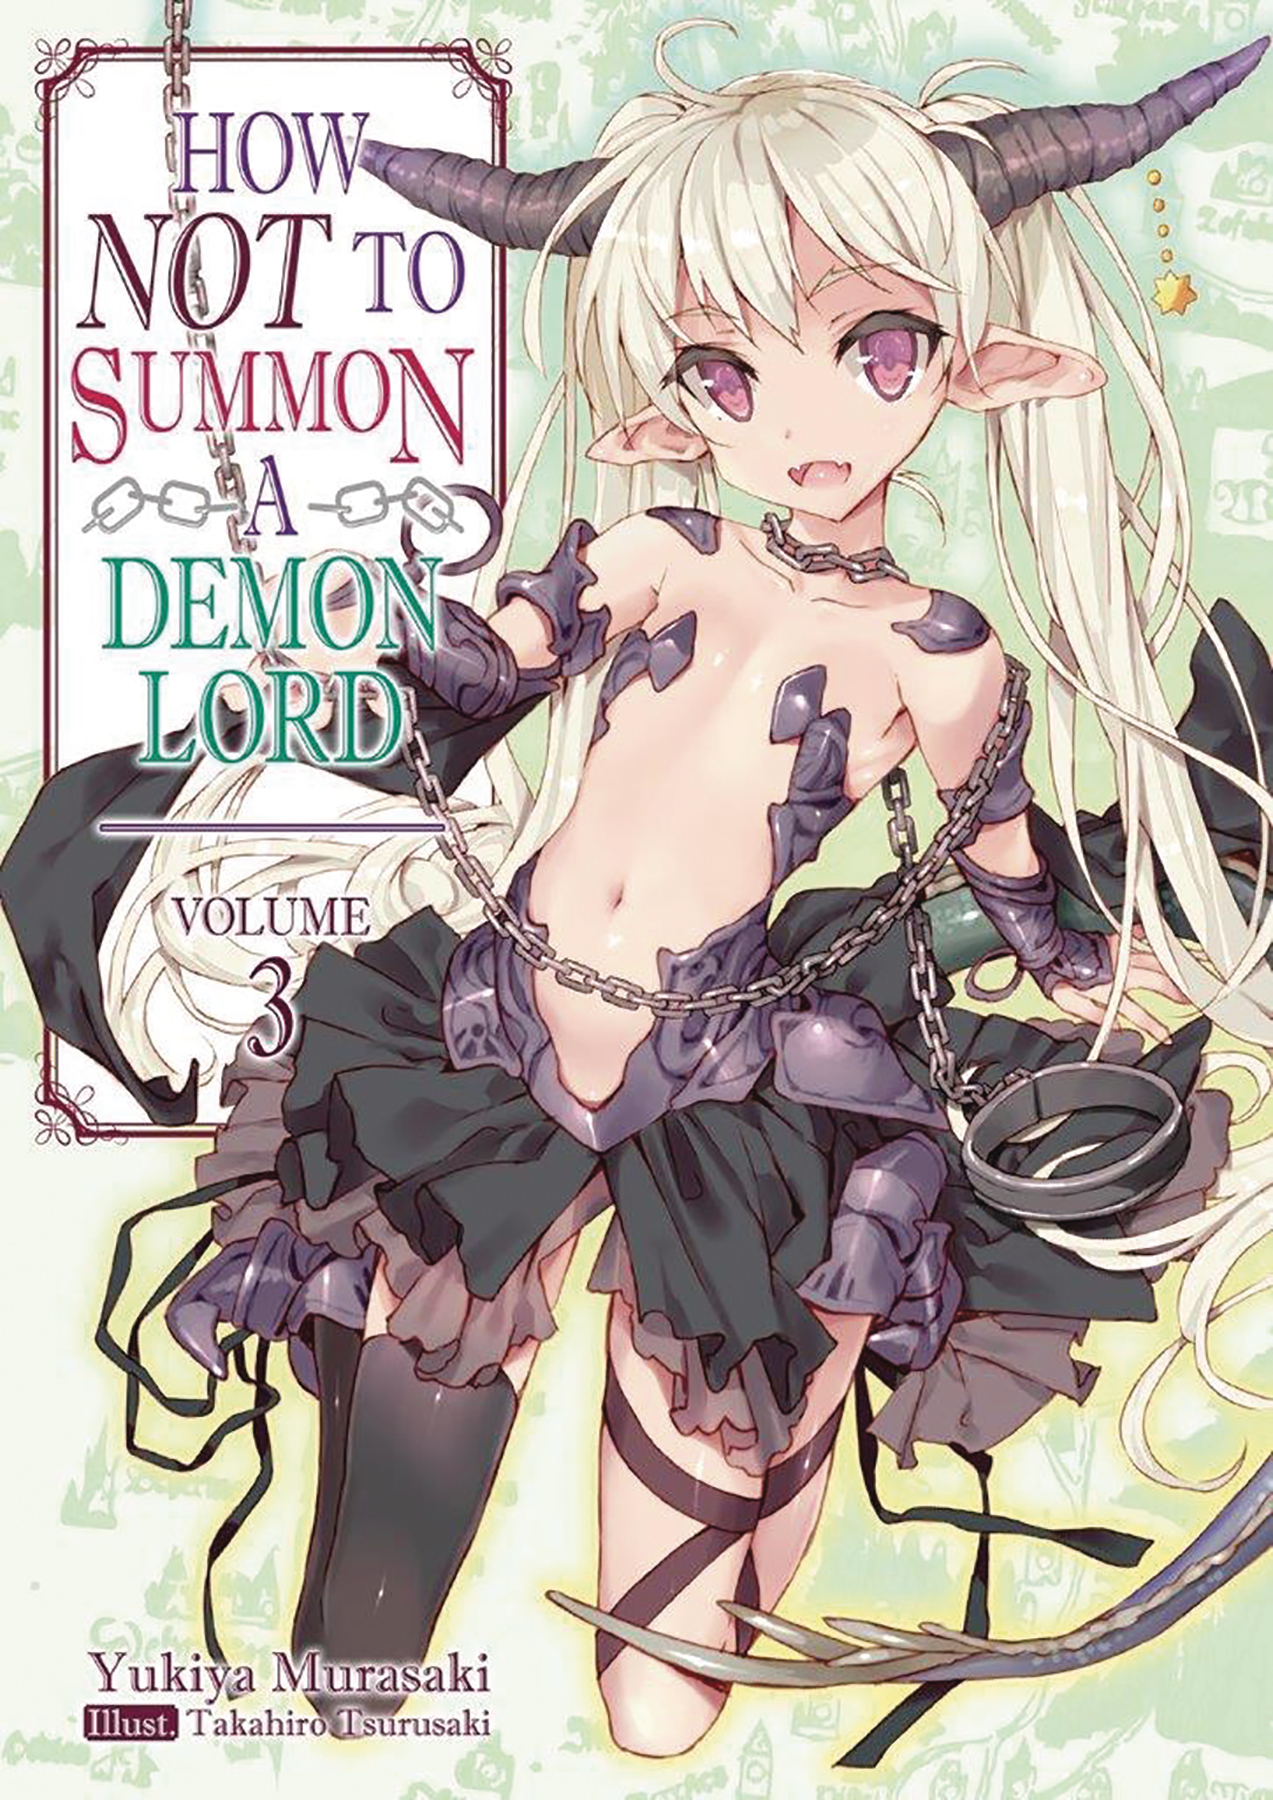 FEB192267 - HOW NOT TO SUMMON DEMON LORD LIGHT NOVEL SC VOL 03 - Previews  World